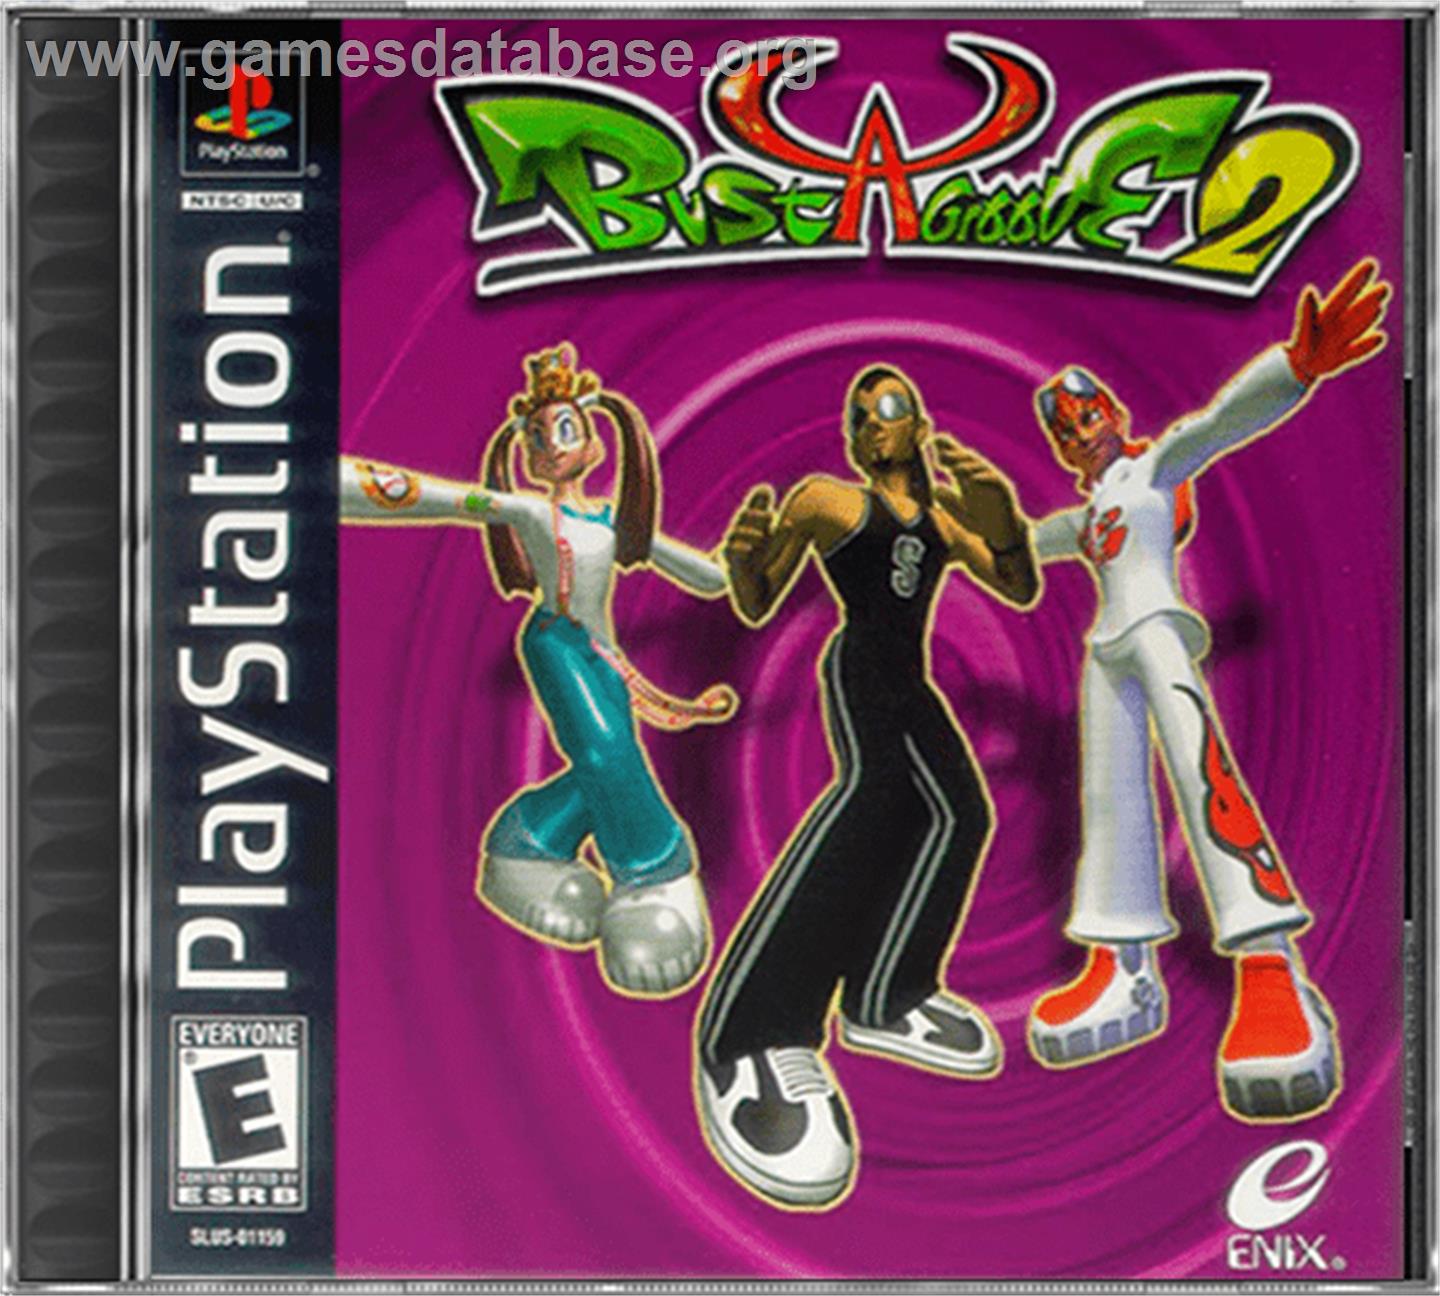 Bust a Groove 2 - Sony Playstation - Artwork - Box